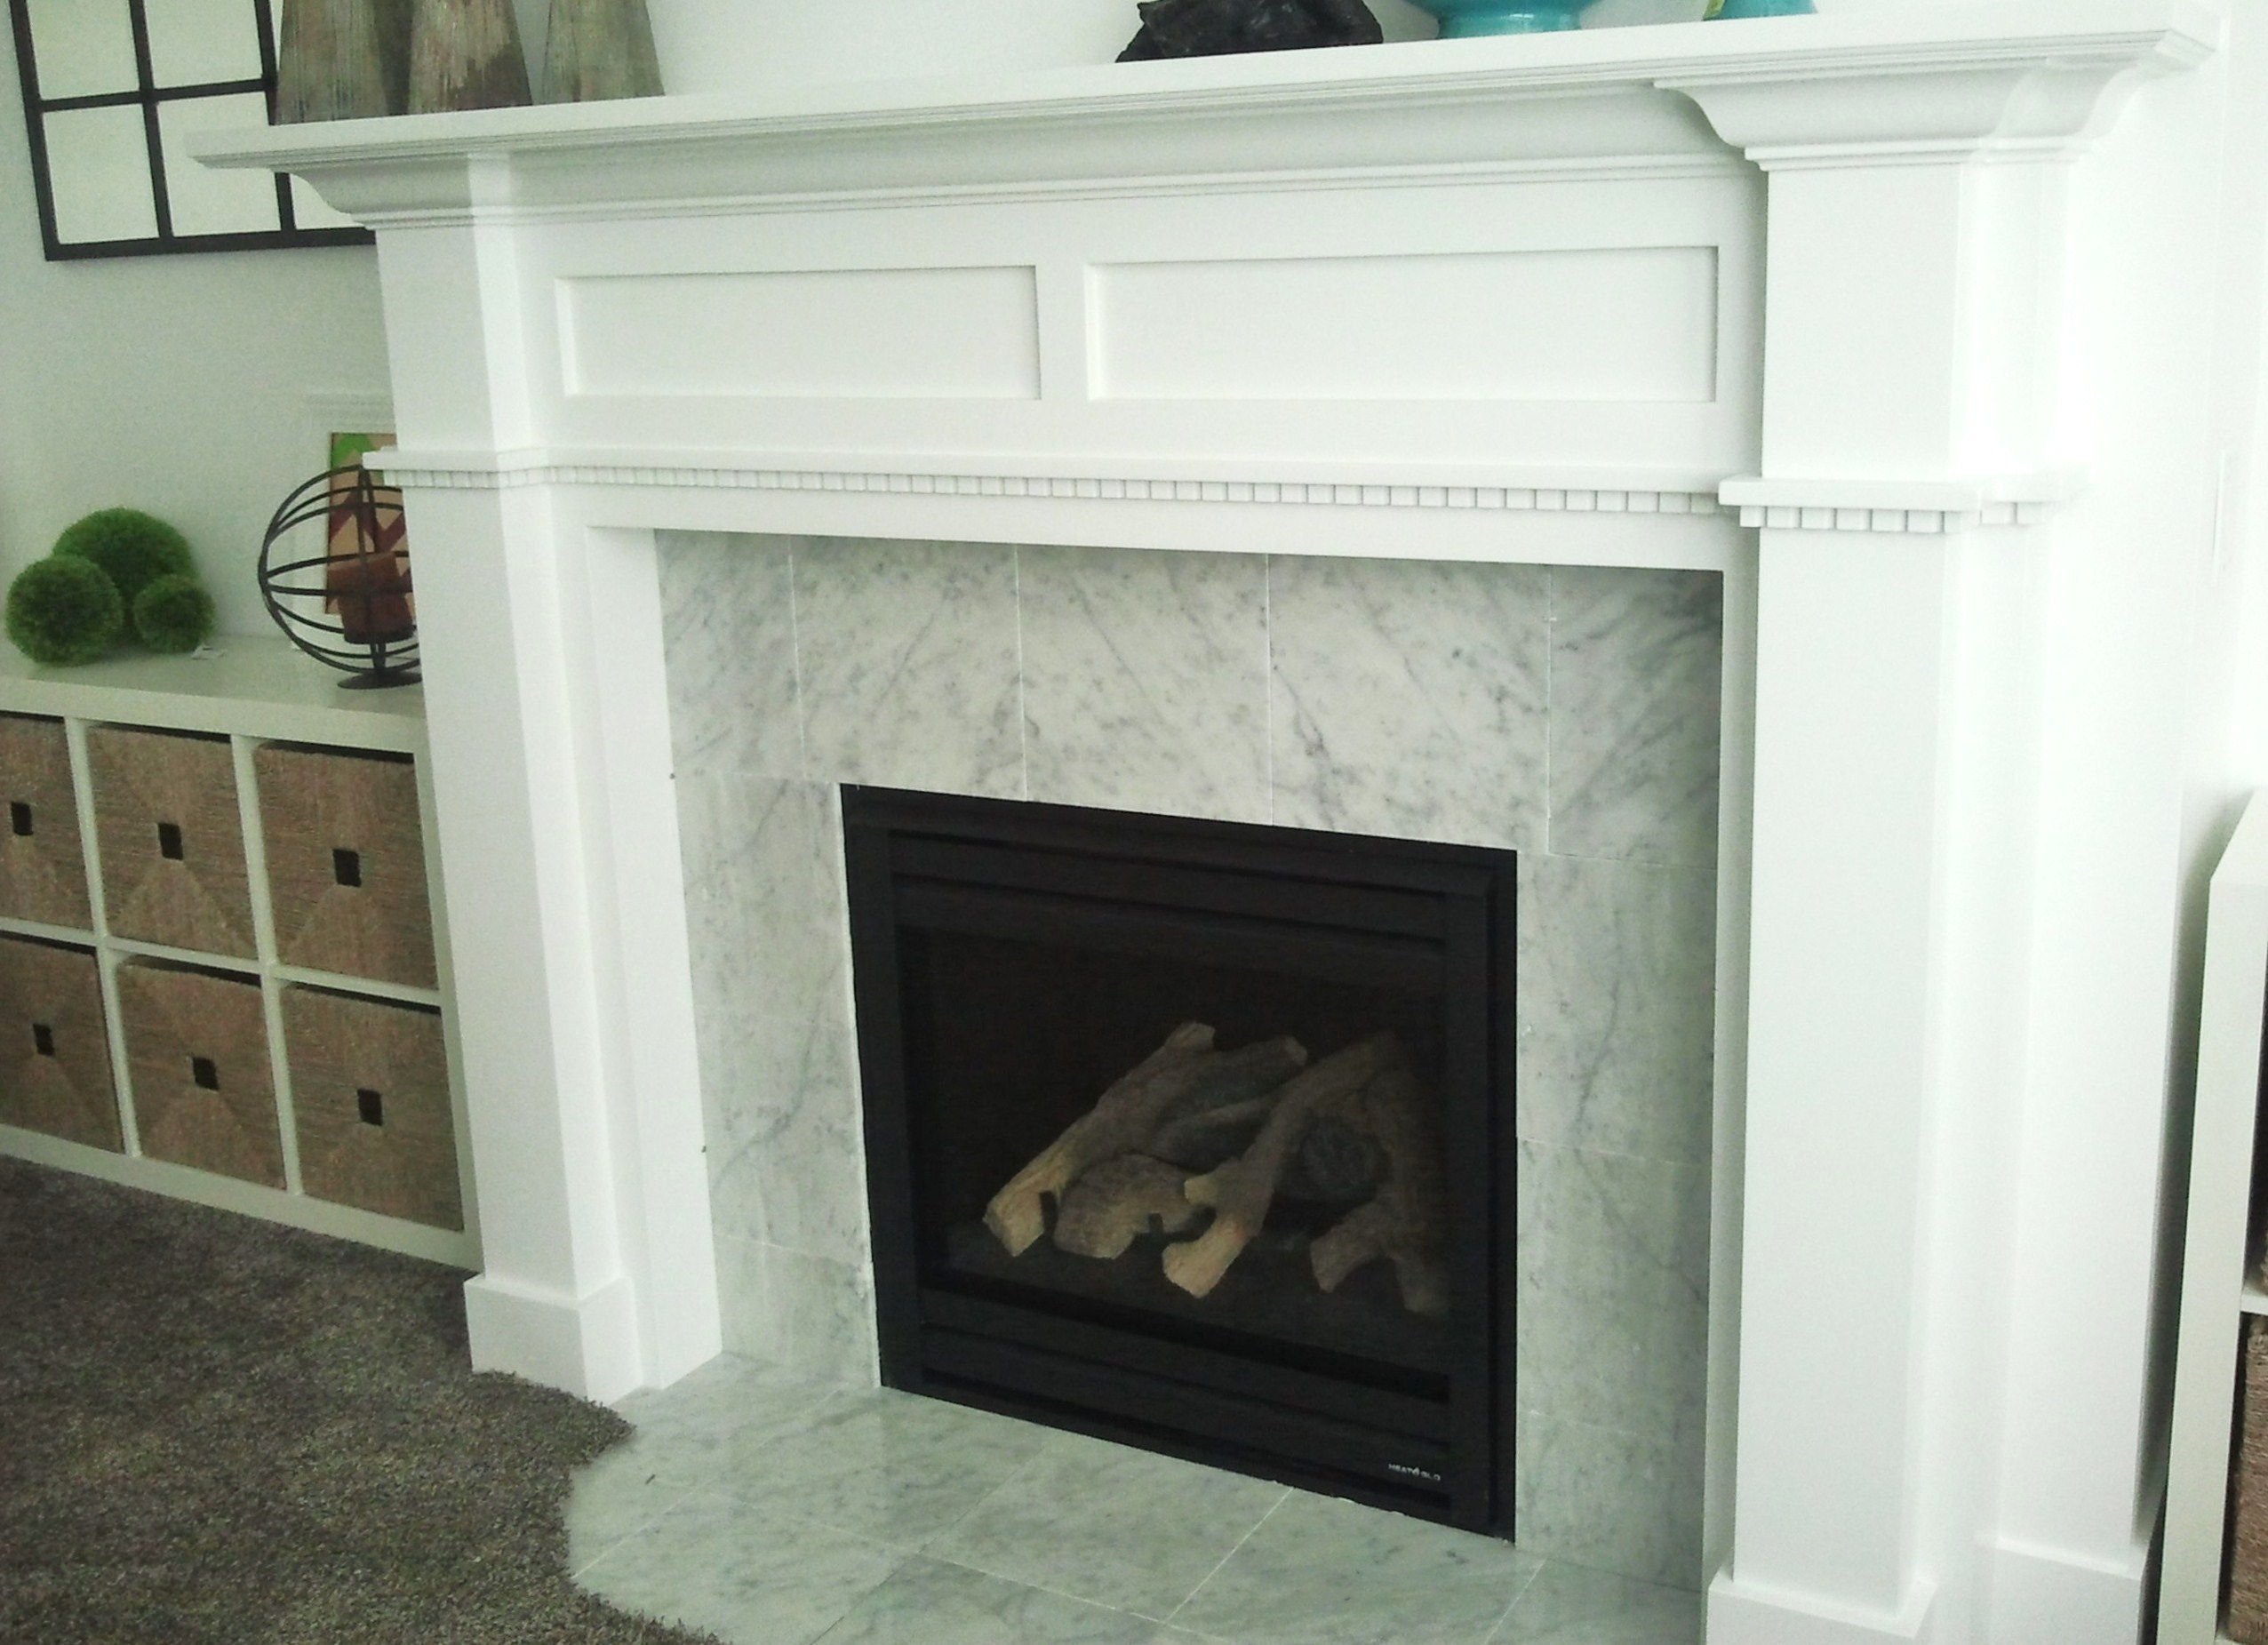 Diy Fireplace Mantel Unique Relatively Fireplace Surround with Shelves Ci22 – Roc Munity